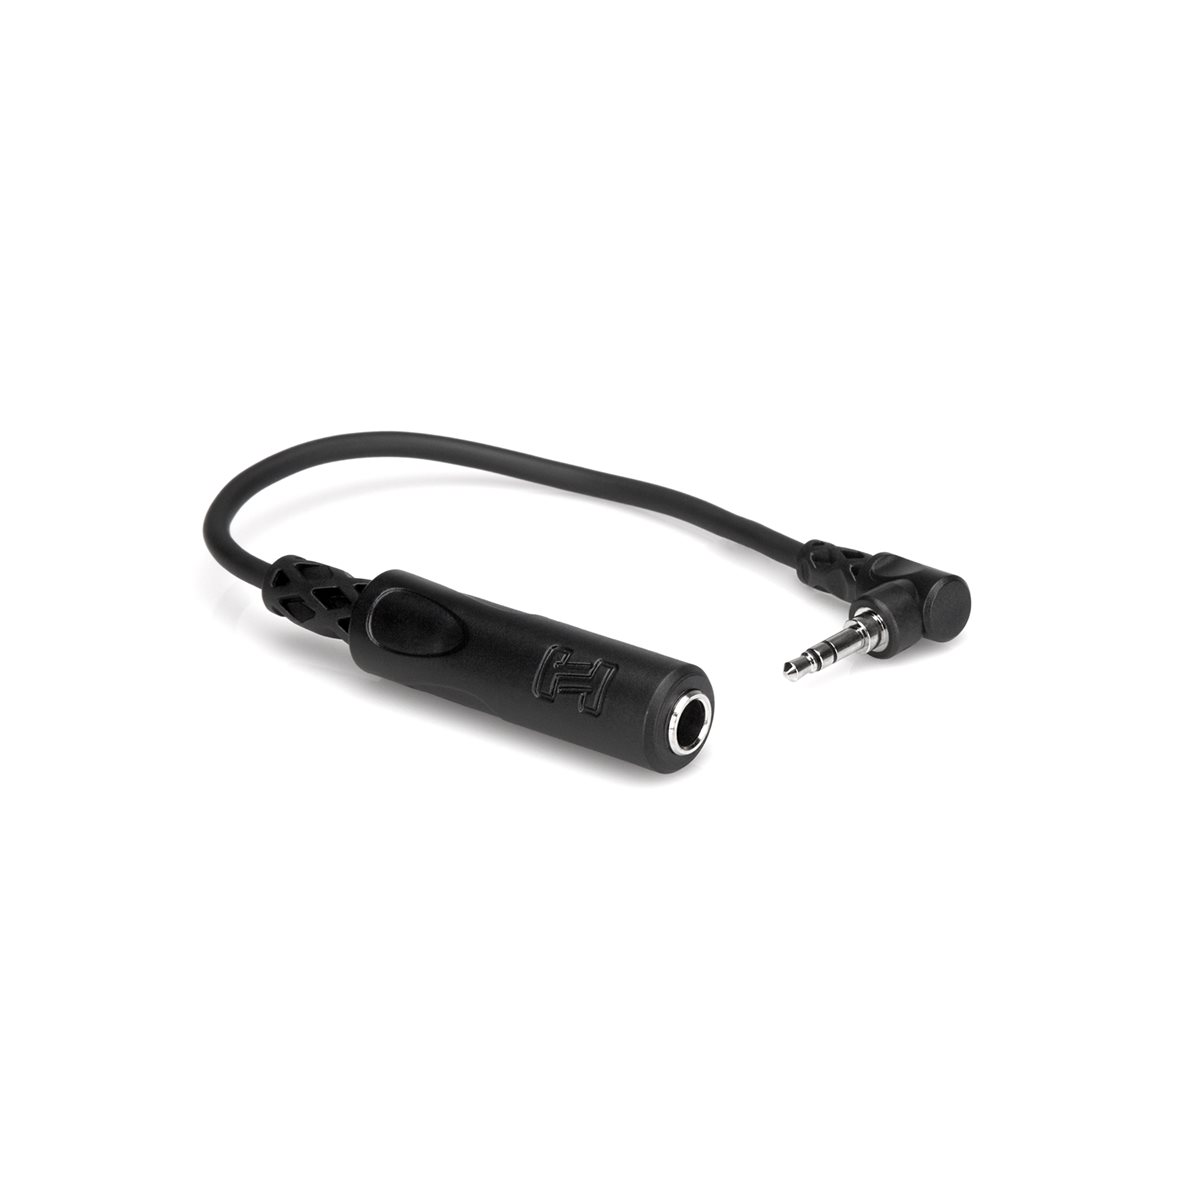 HOSA - MHE100.5 - 1 / 4 inch TRS Female to Right-angle 3.5mm TRS Male Adapter Cable